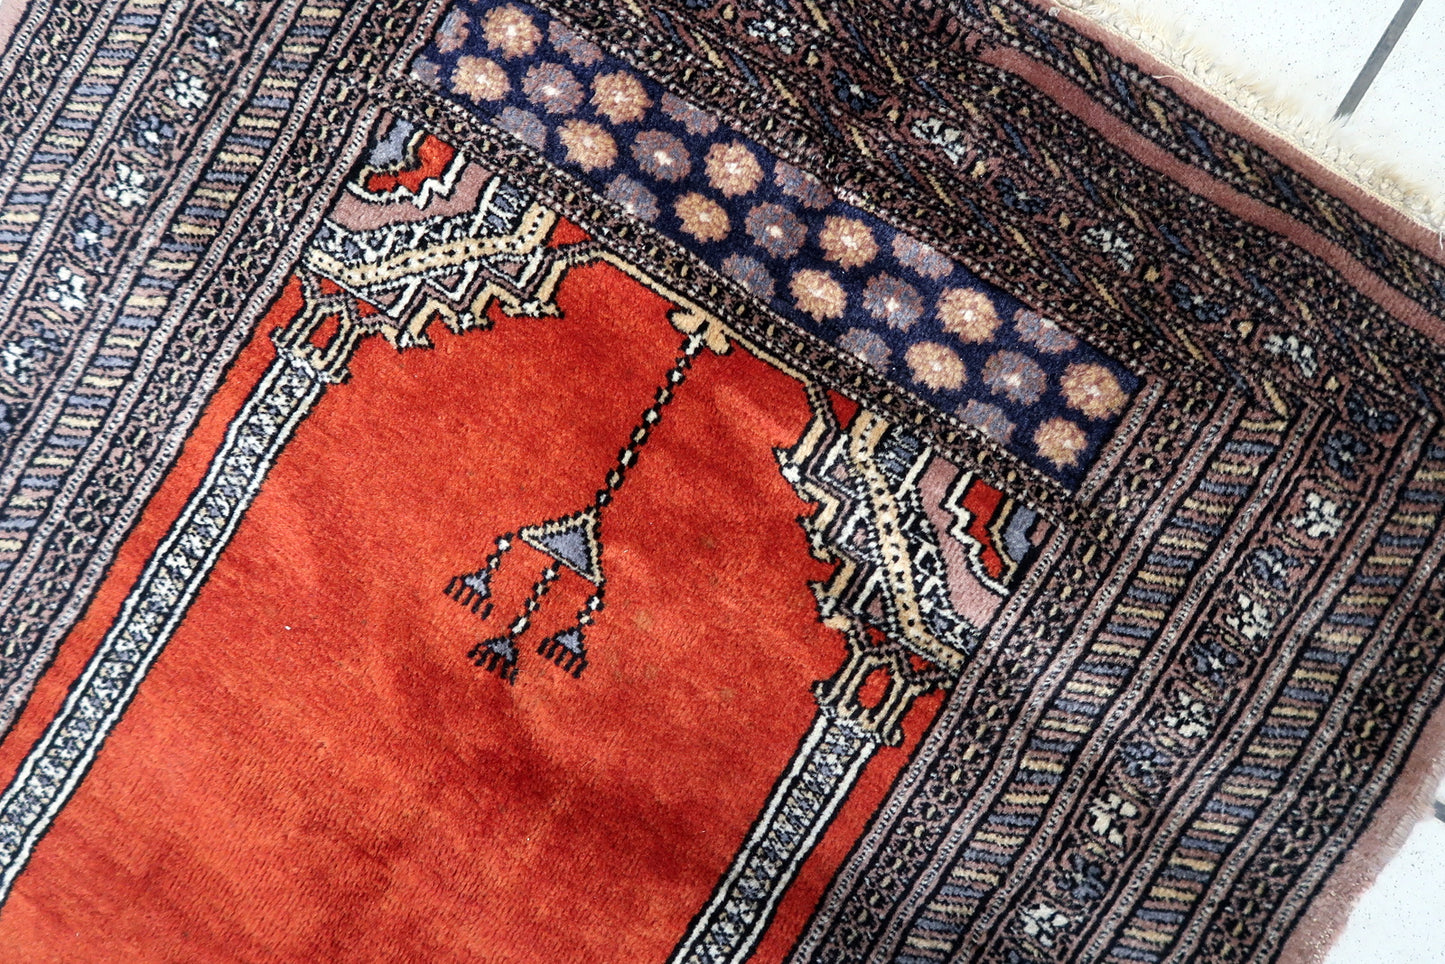 Overhead shot of the Pakistani Lahore prayer rug displaying its warm and inviting ambiance